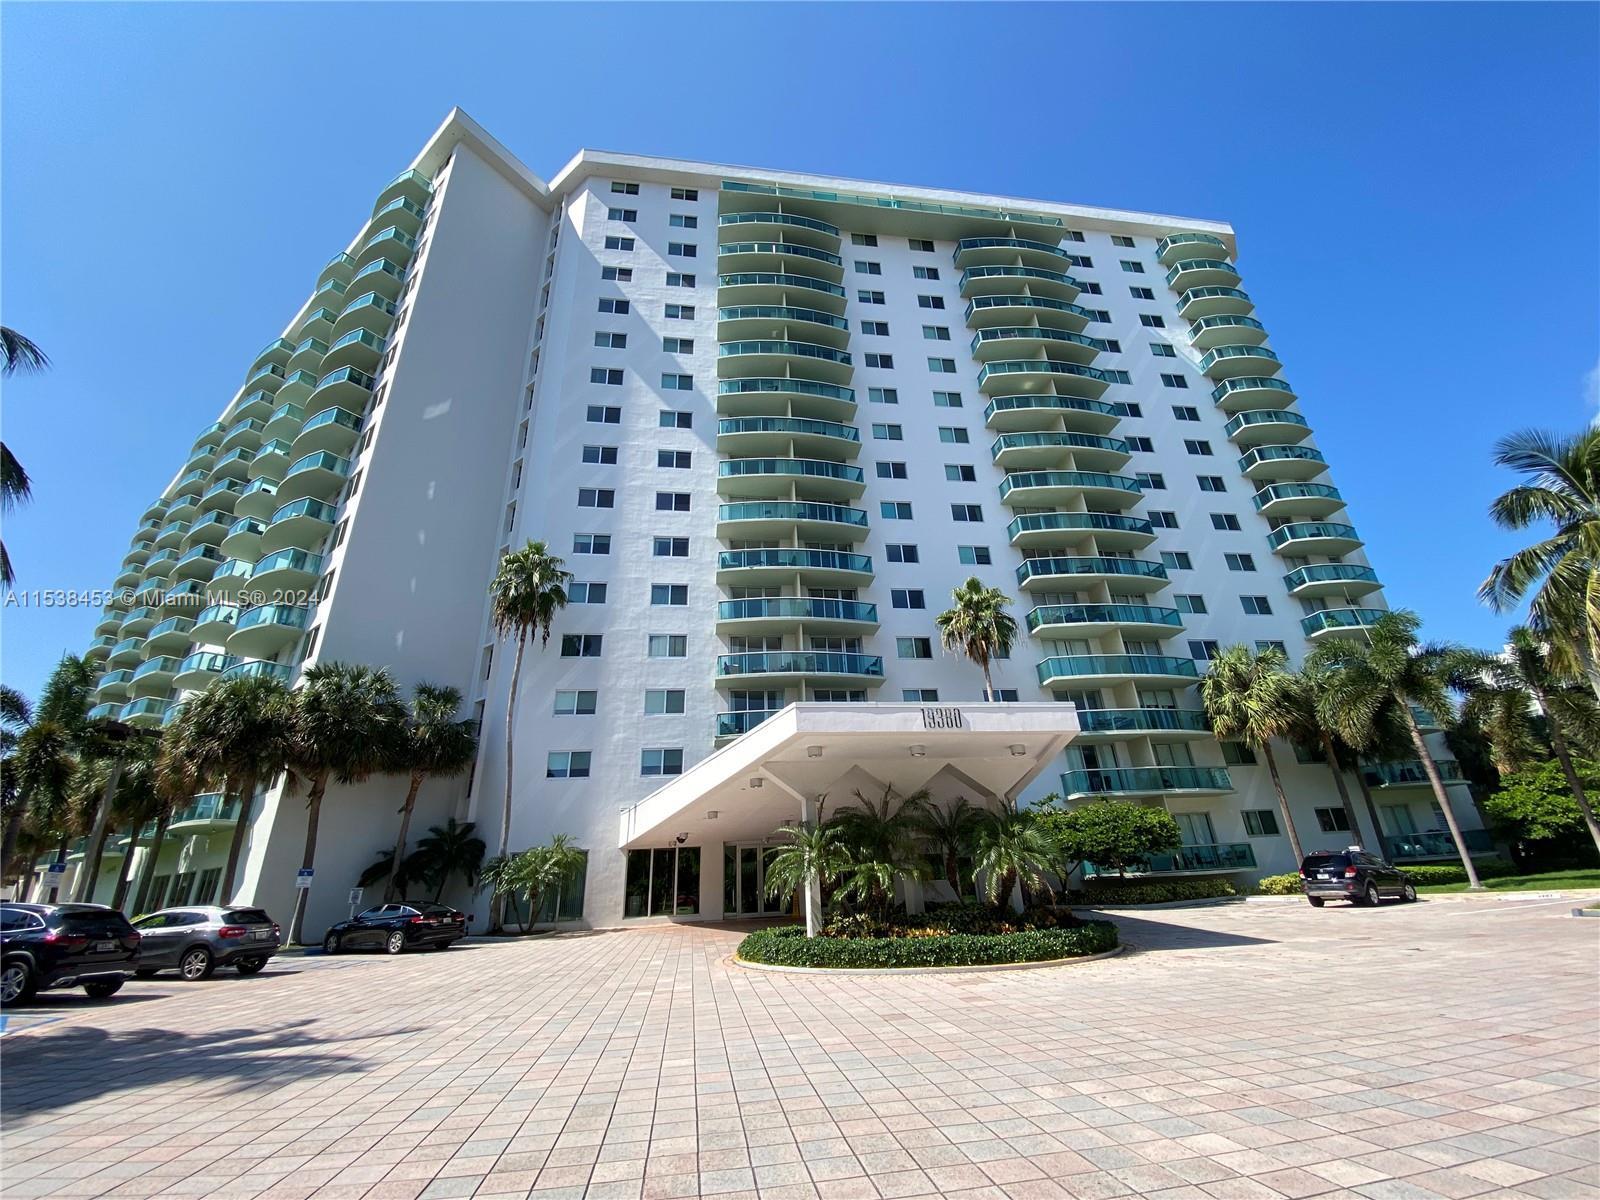 Photo of 19380 Collins Ave #611 in Sunny Isles Beach, FL